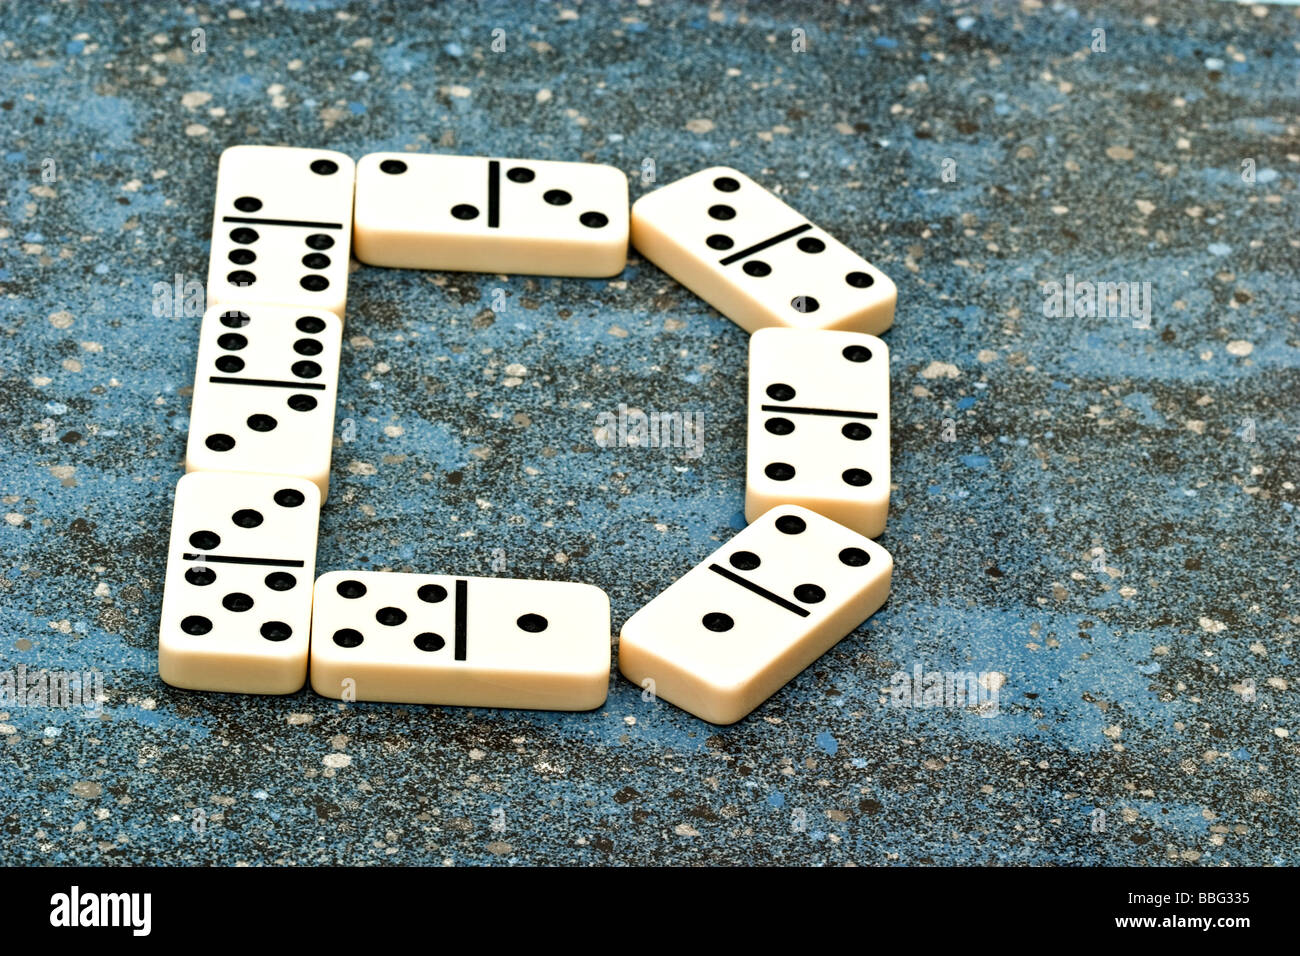 Dominoes forming the letter D. Stock Photo